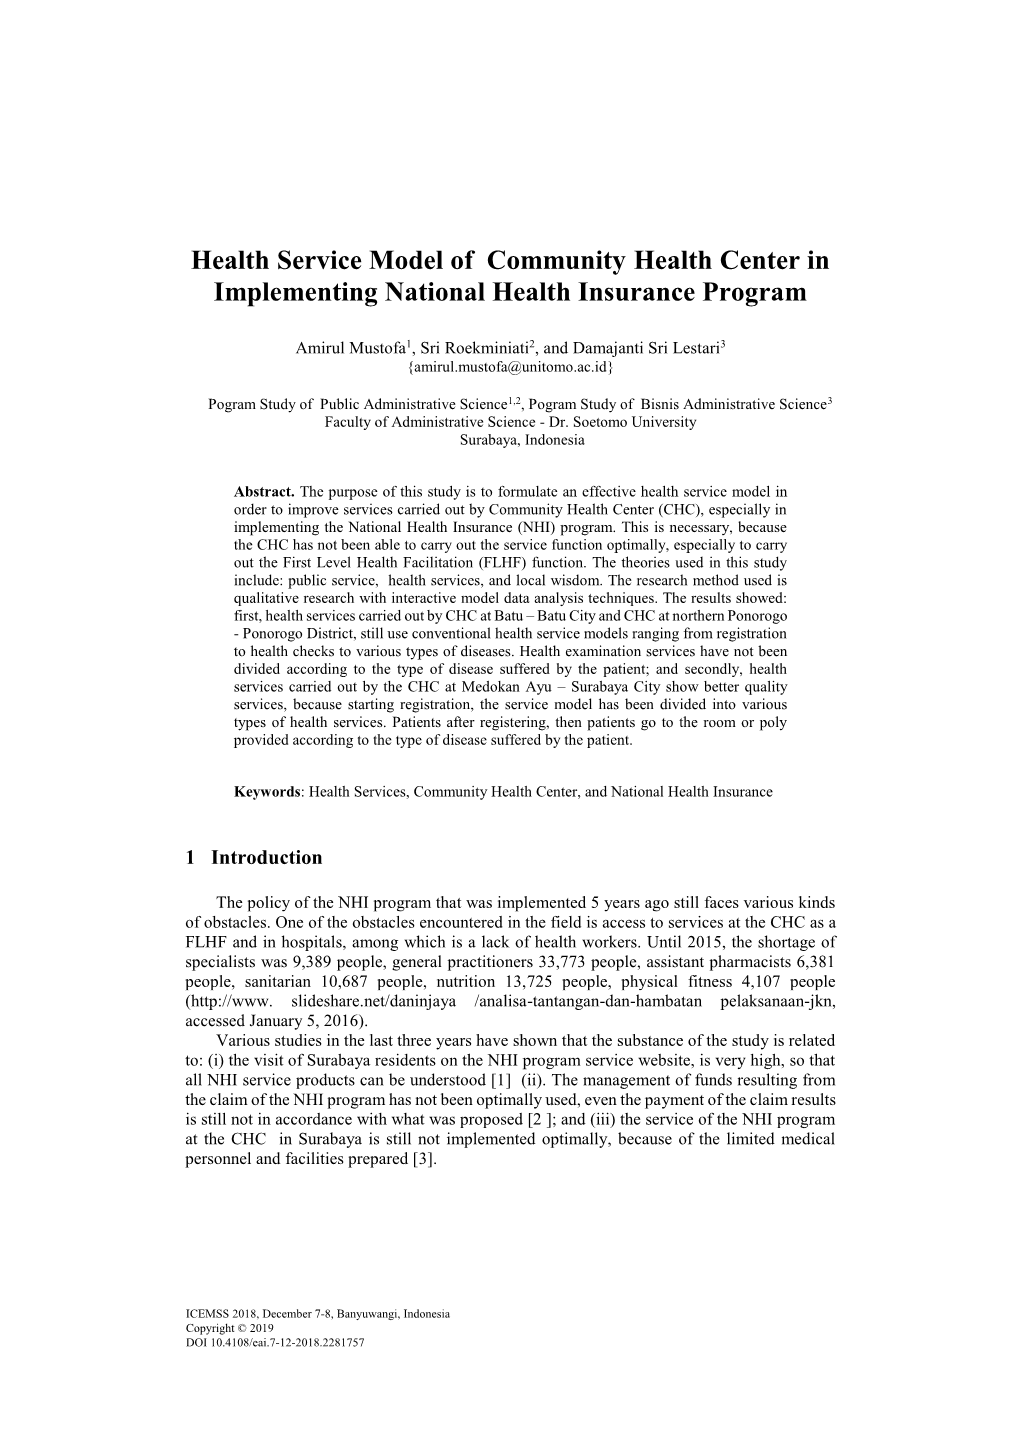 Health Service Model of Community Health Center in Implementing National Health Insurance Program